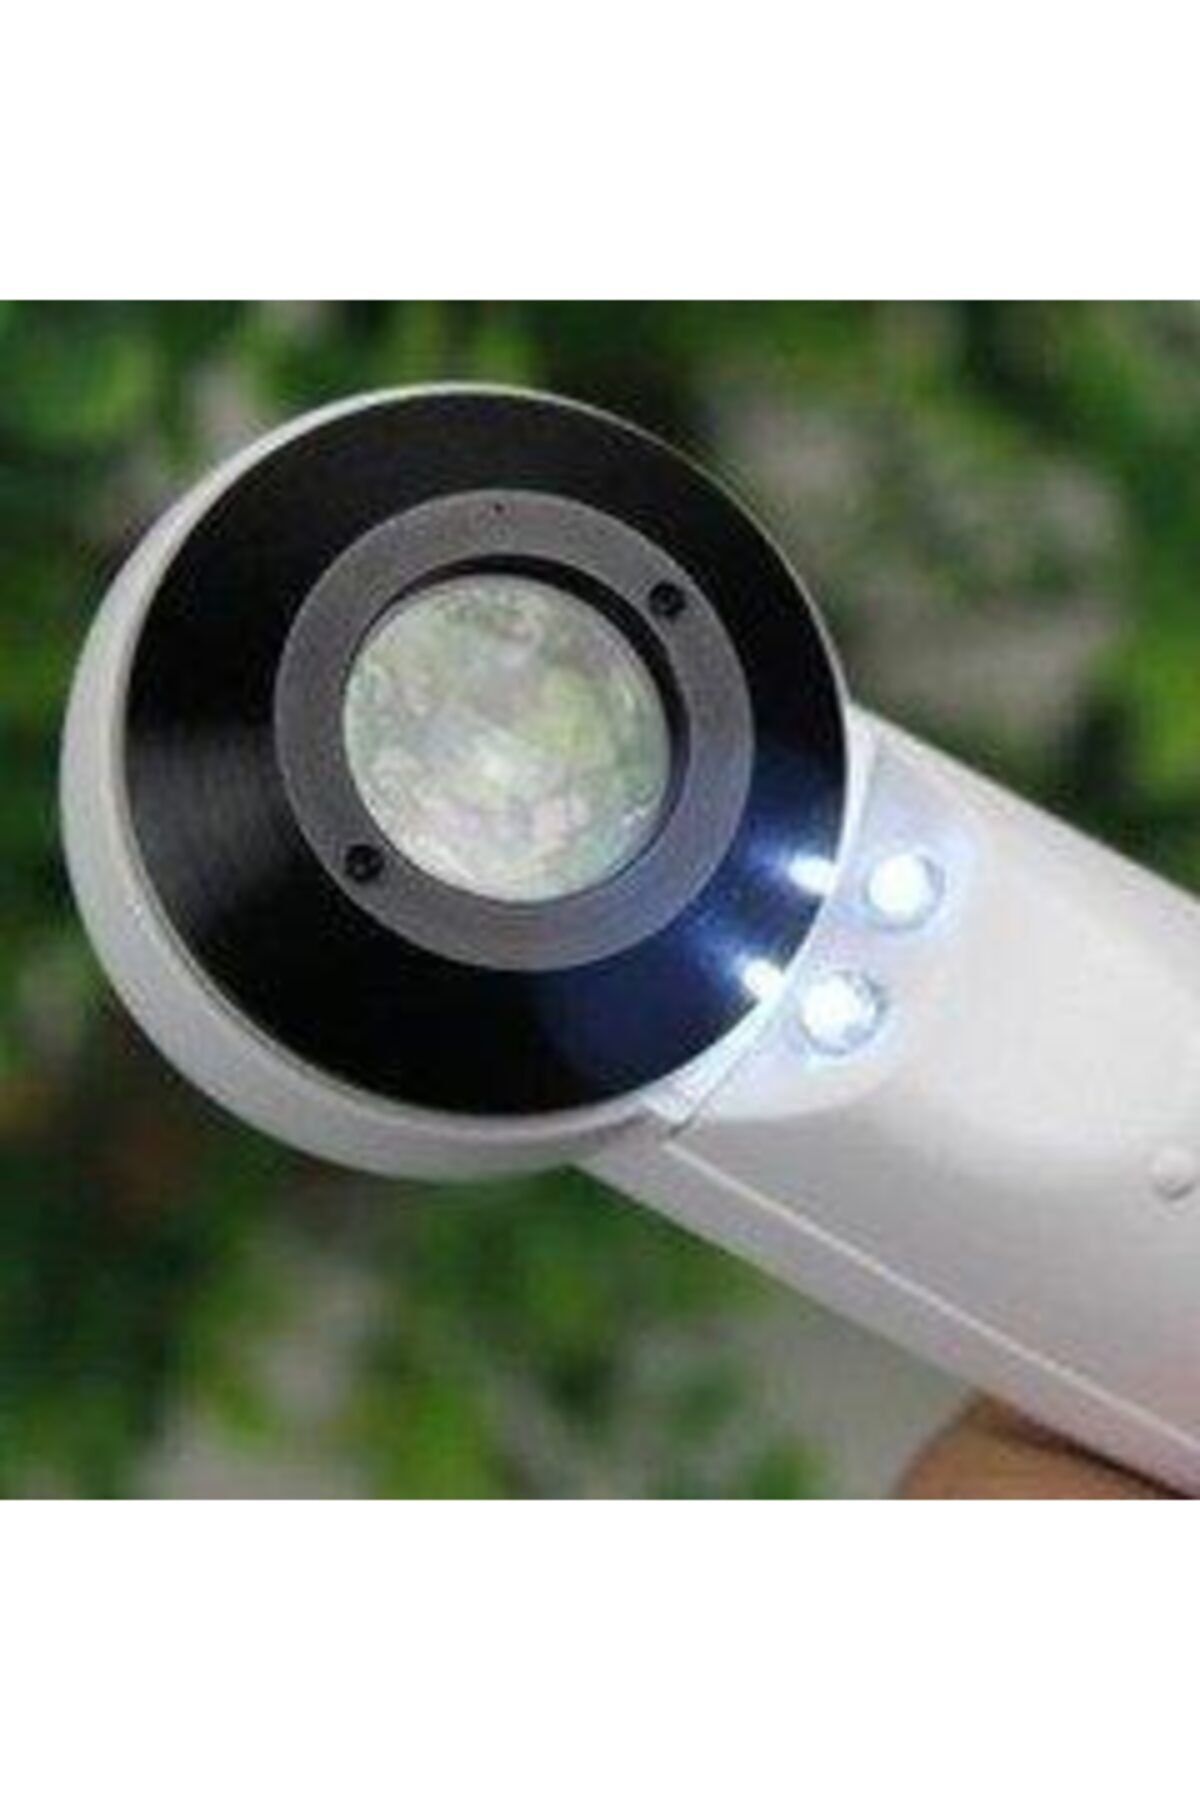 Proskit Ma-020 Magnifying Glass with LED Light 22x